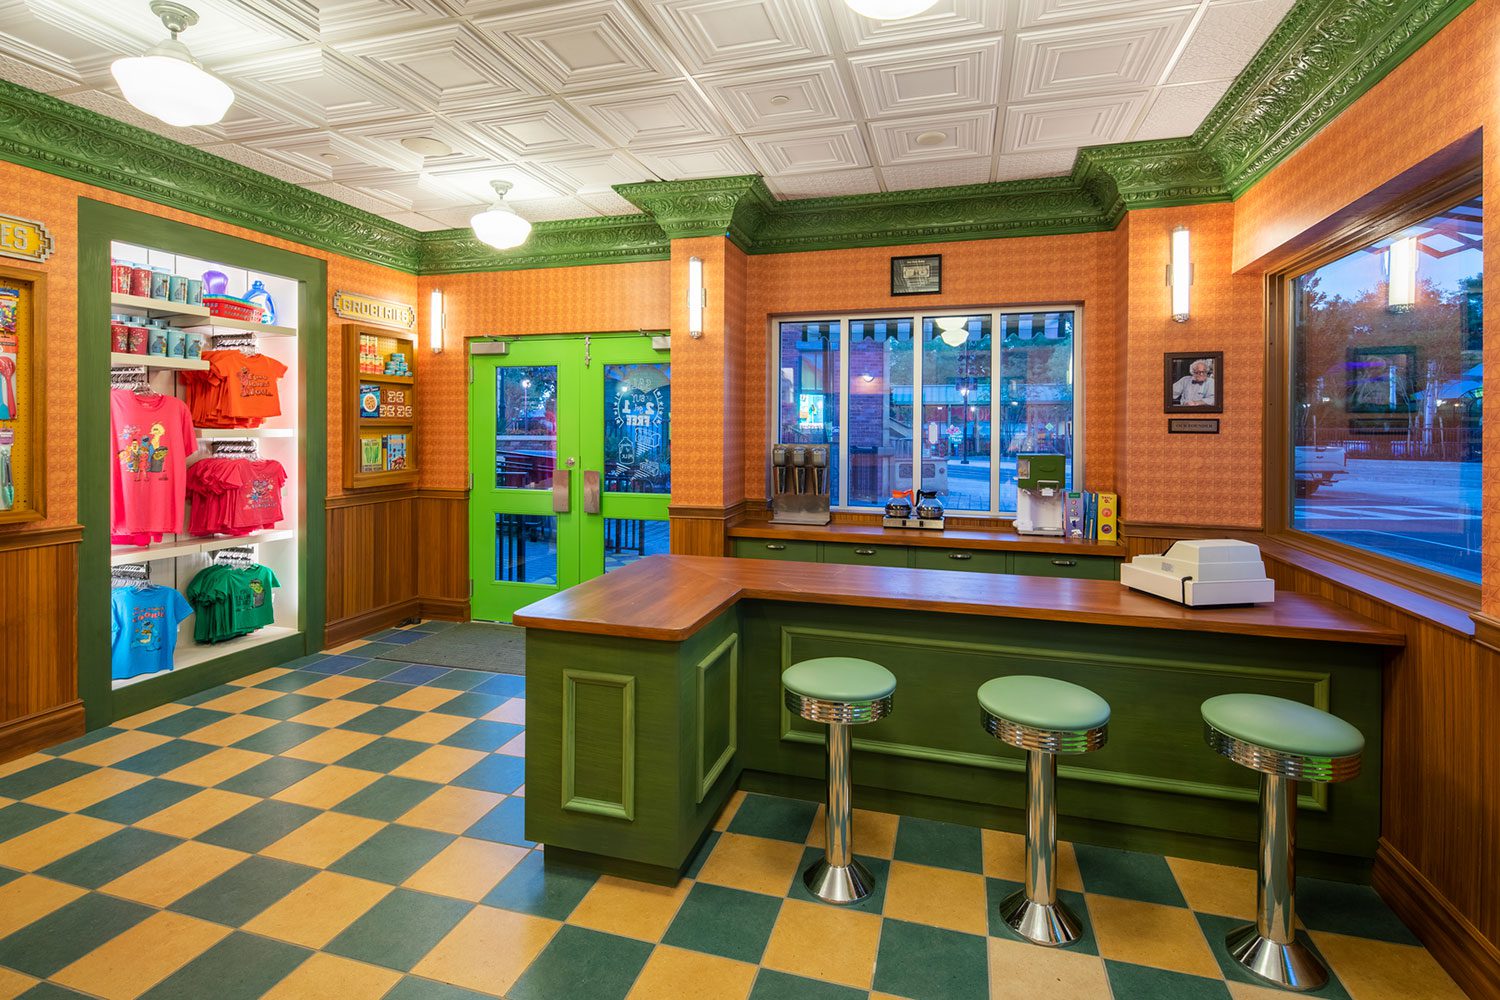 Interior of Sesame Street gift shop with check out bar and green stools